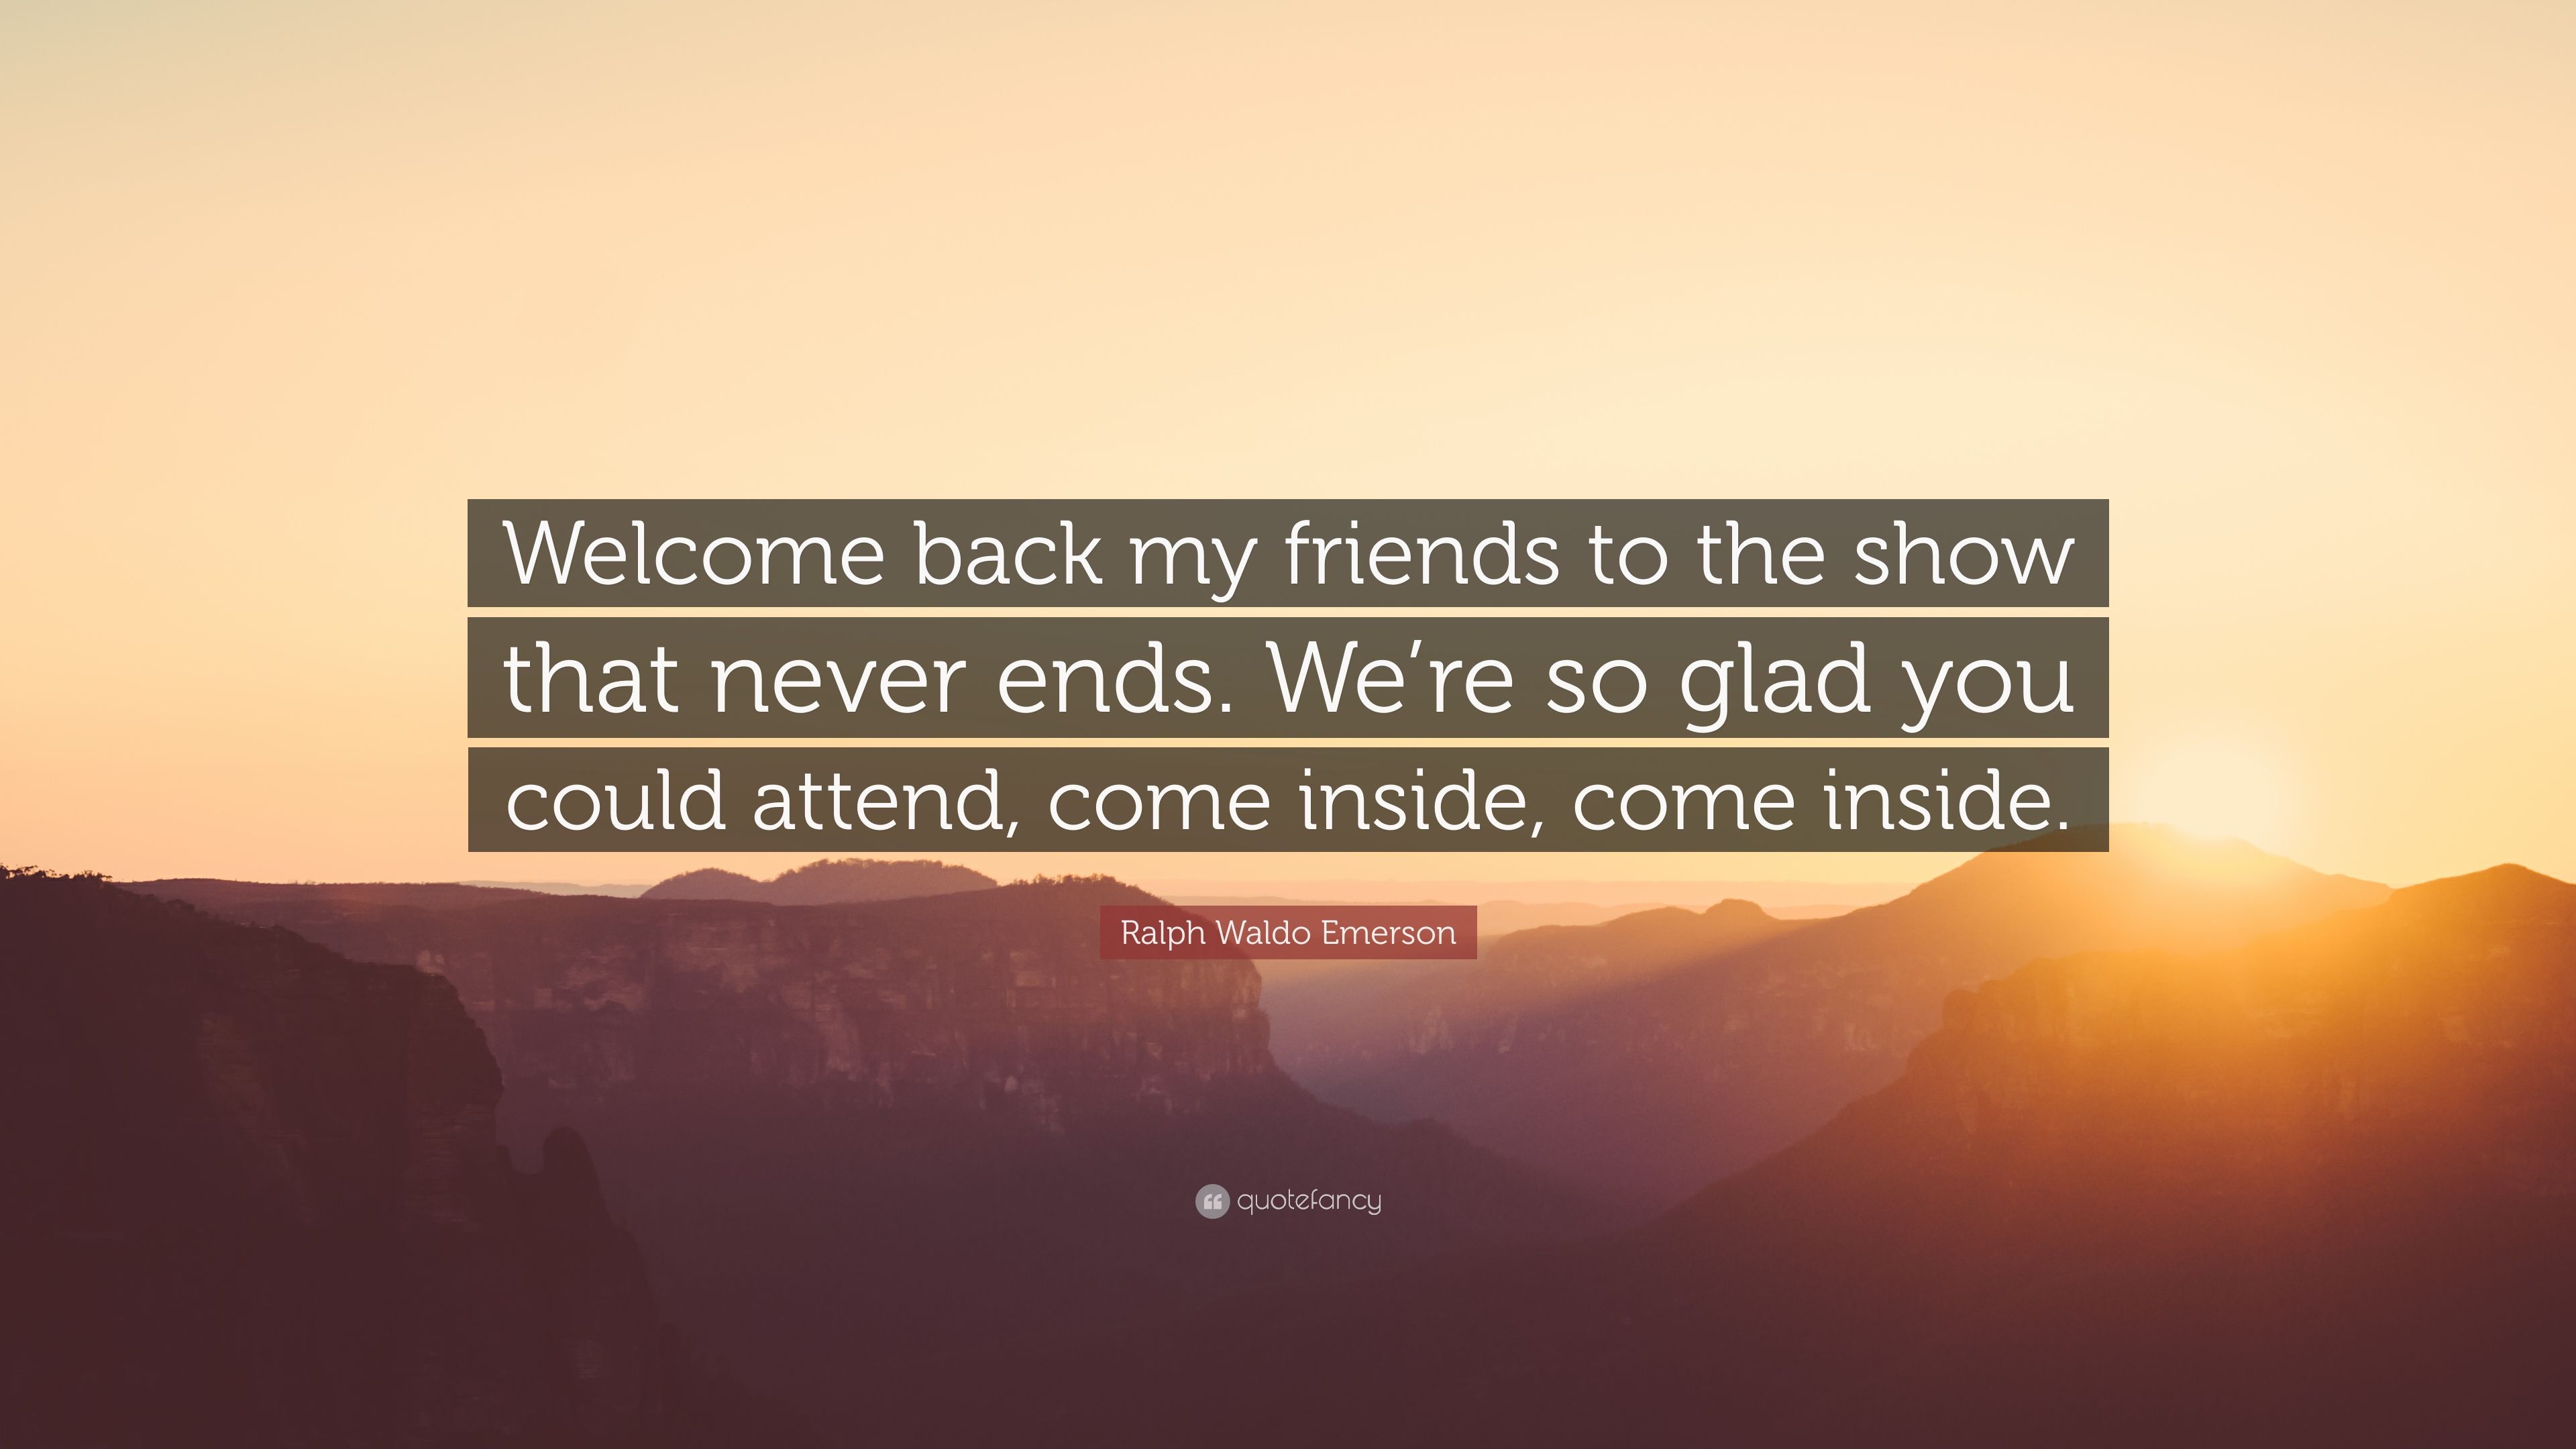 Ralph Waldo Emerson Quote: “Welcome back my friends to the show that never ends. We're so glad you could attend, come inside, come inside.” (12 wallpaper)